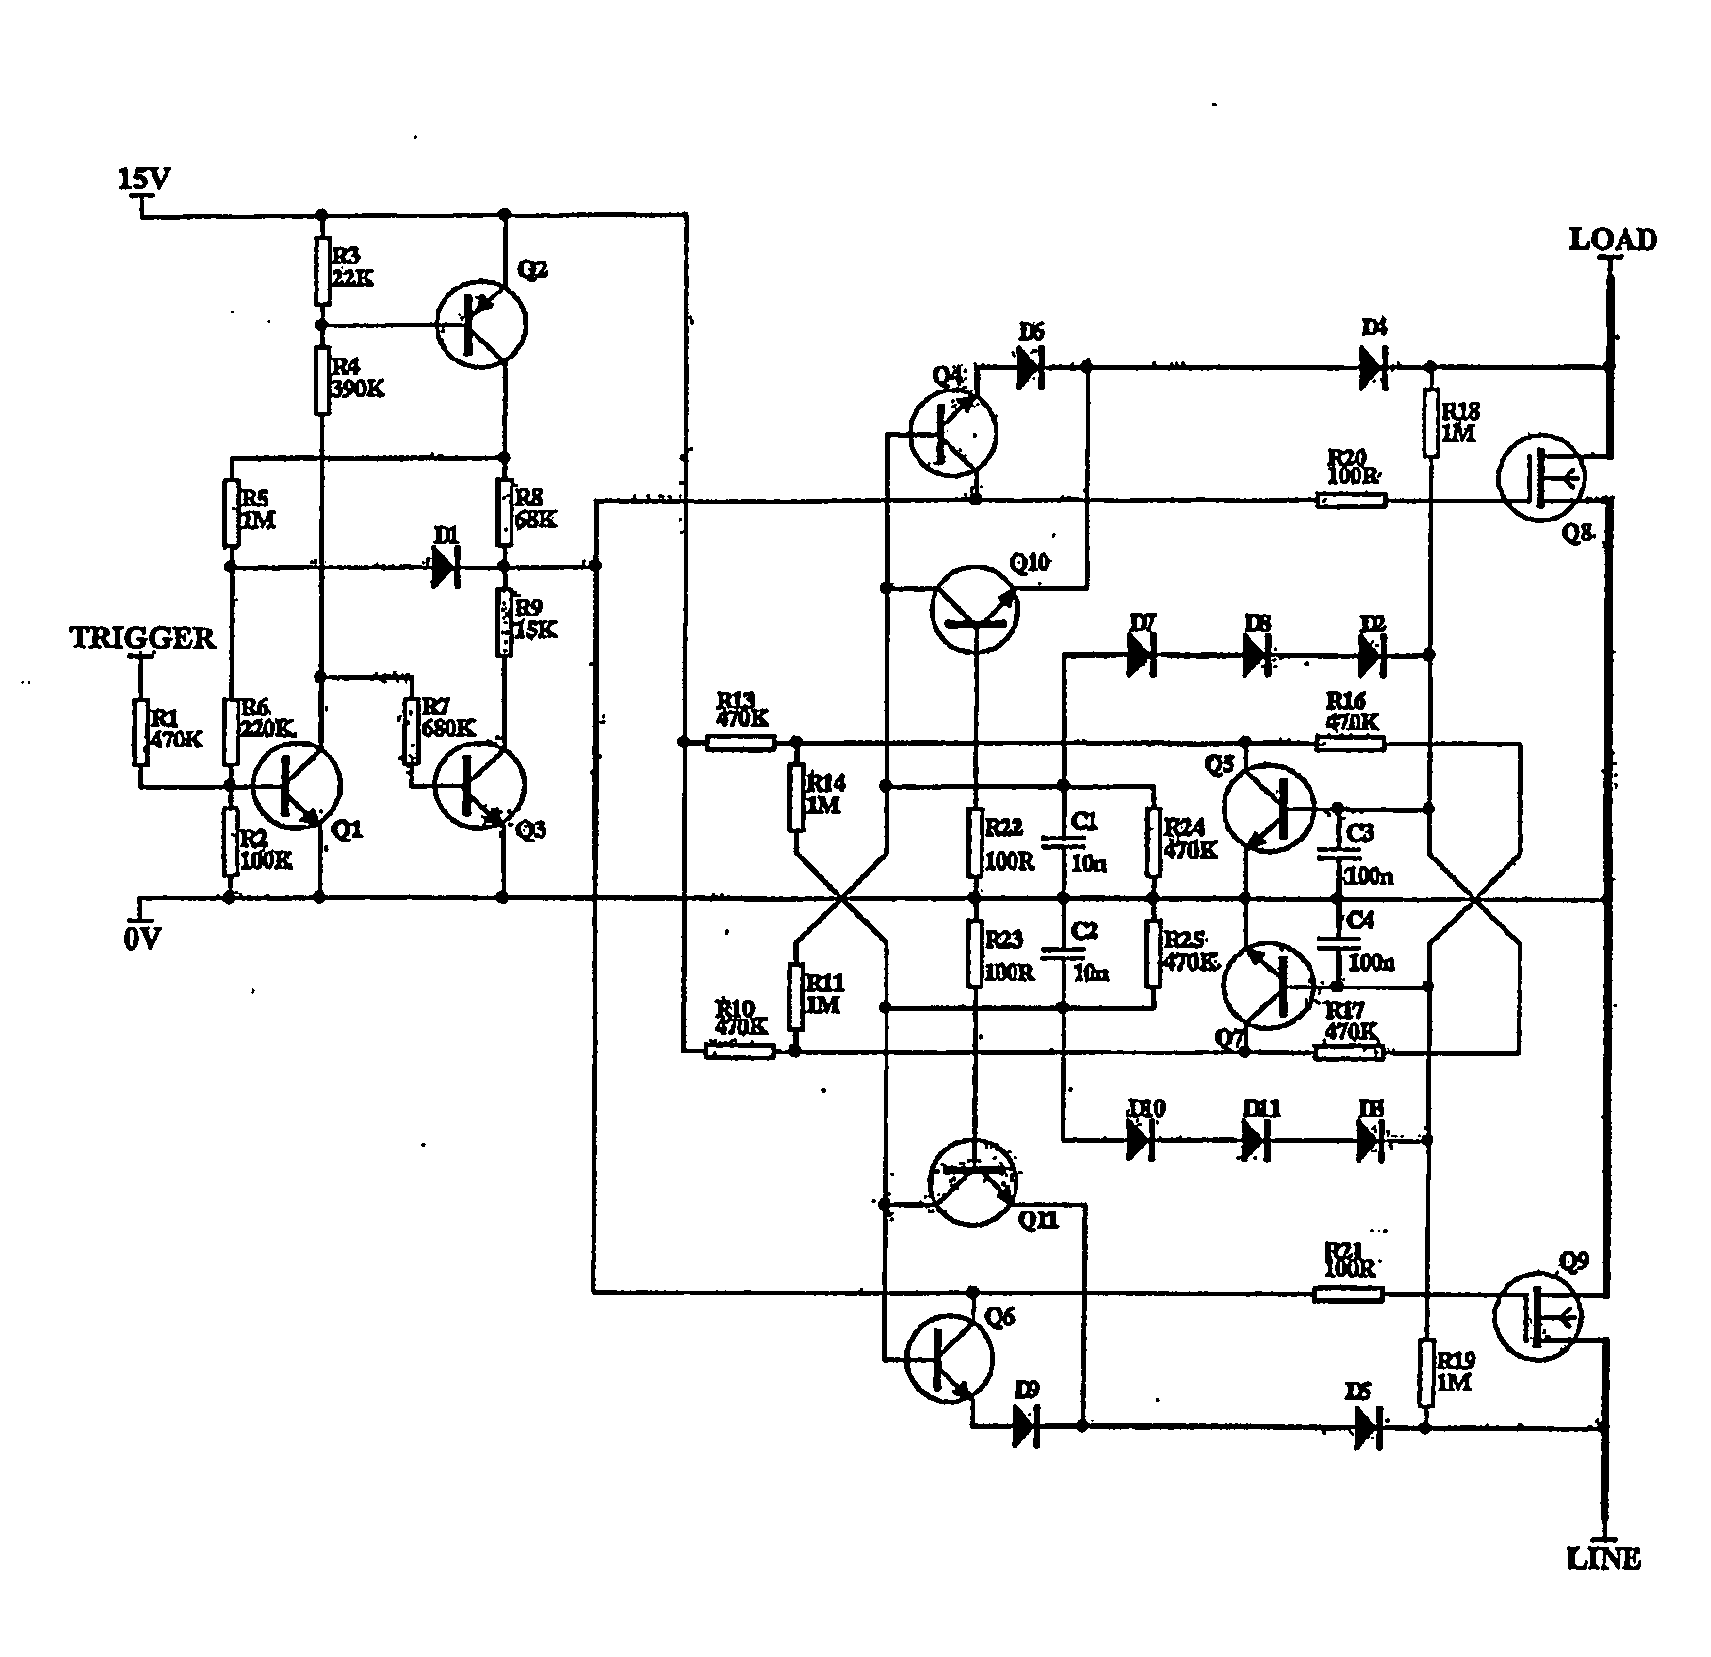 Current zero crossing detector in a dimmer circuit